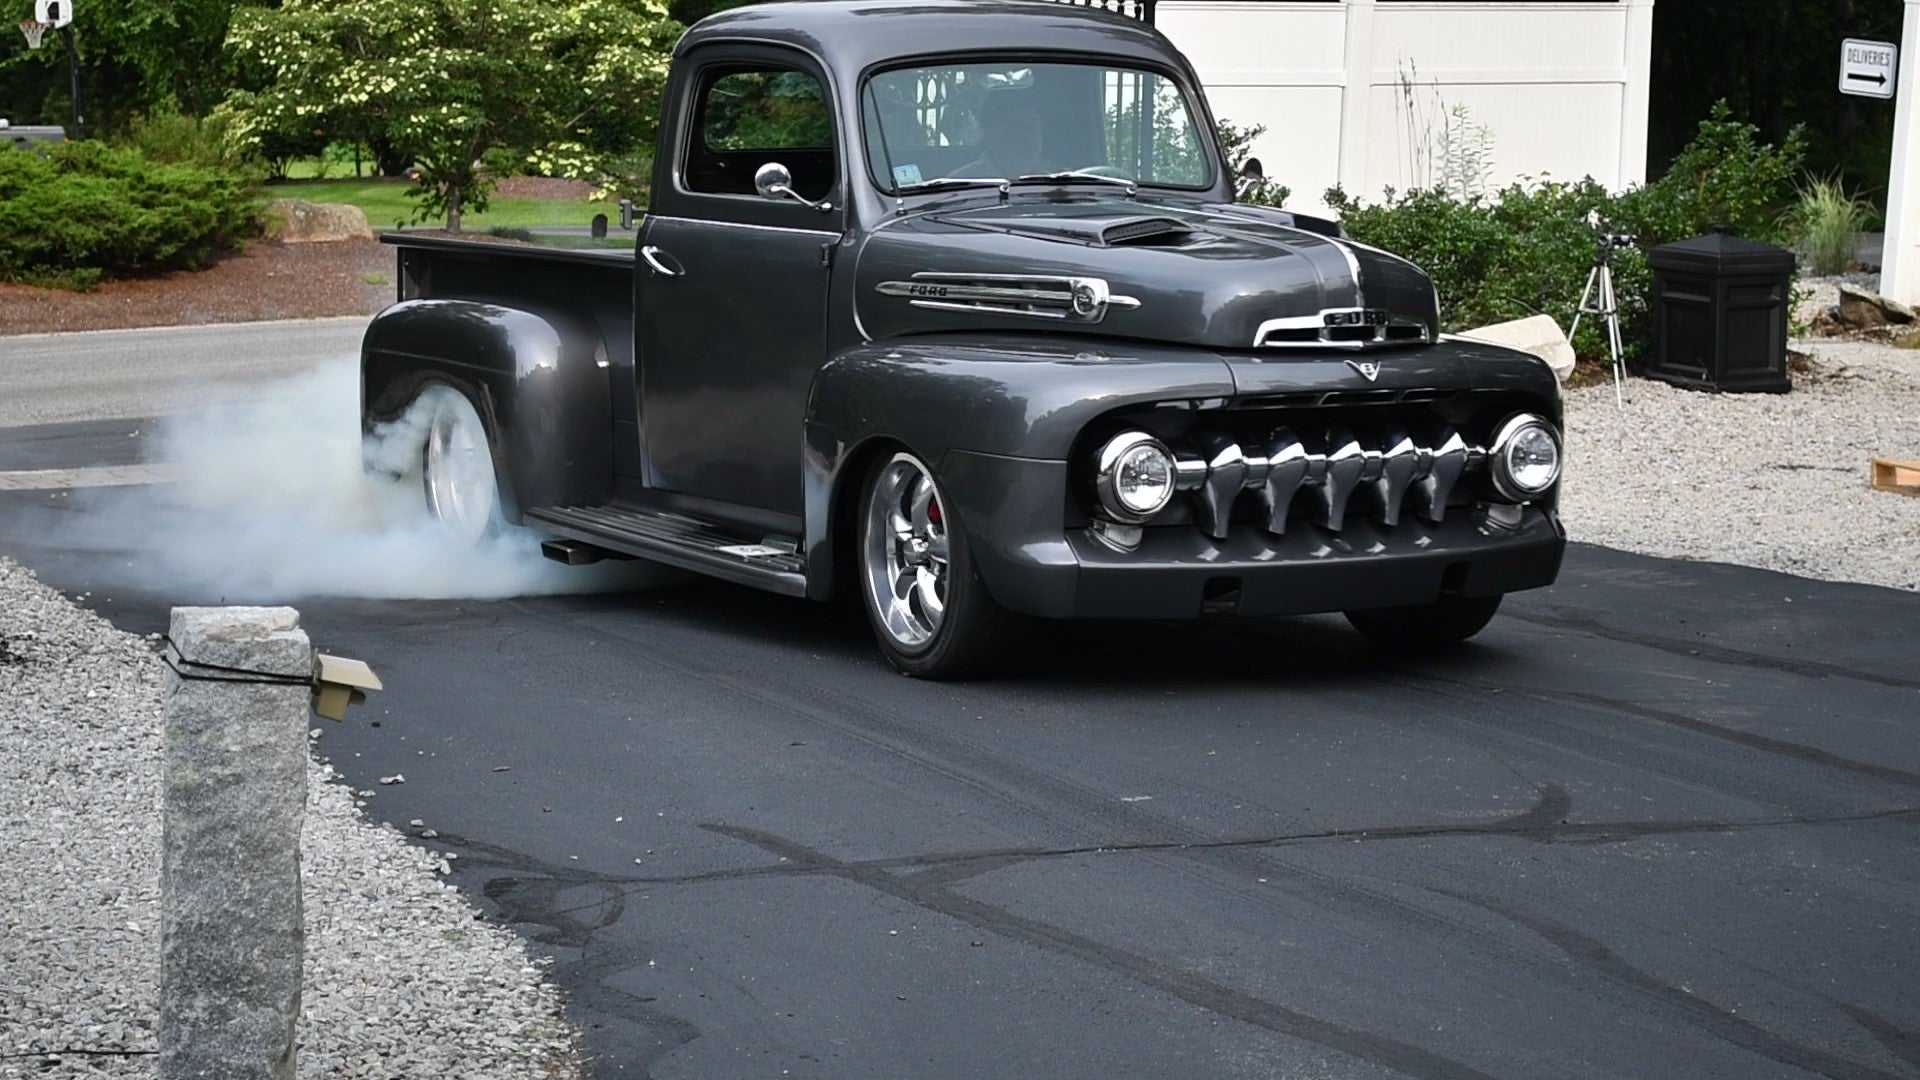 Holley Sniper Procharger 51 Ford F-100 Road Test Burn Out